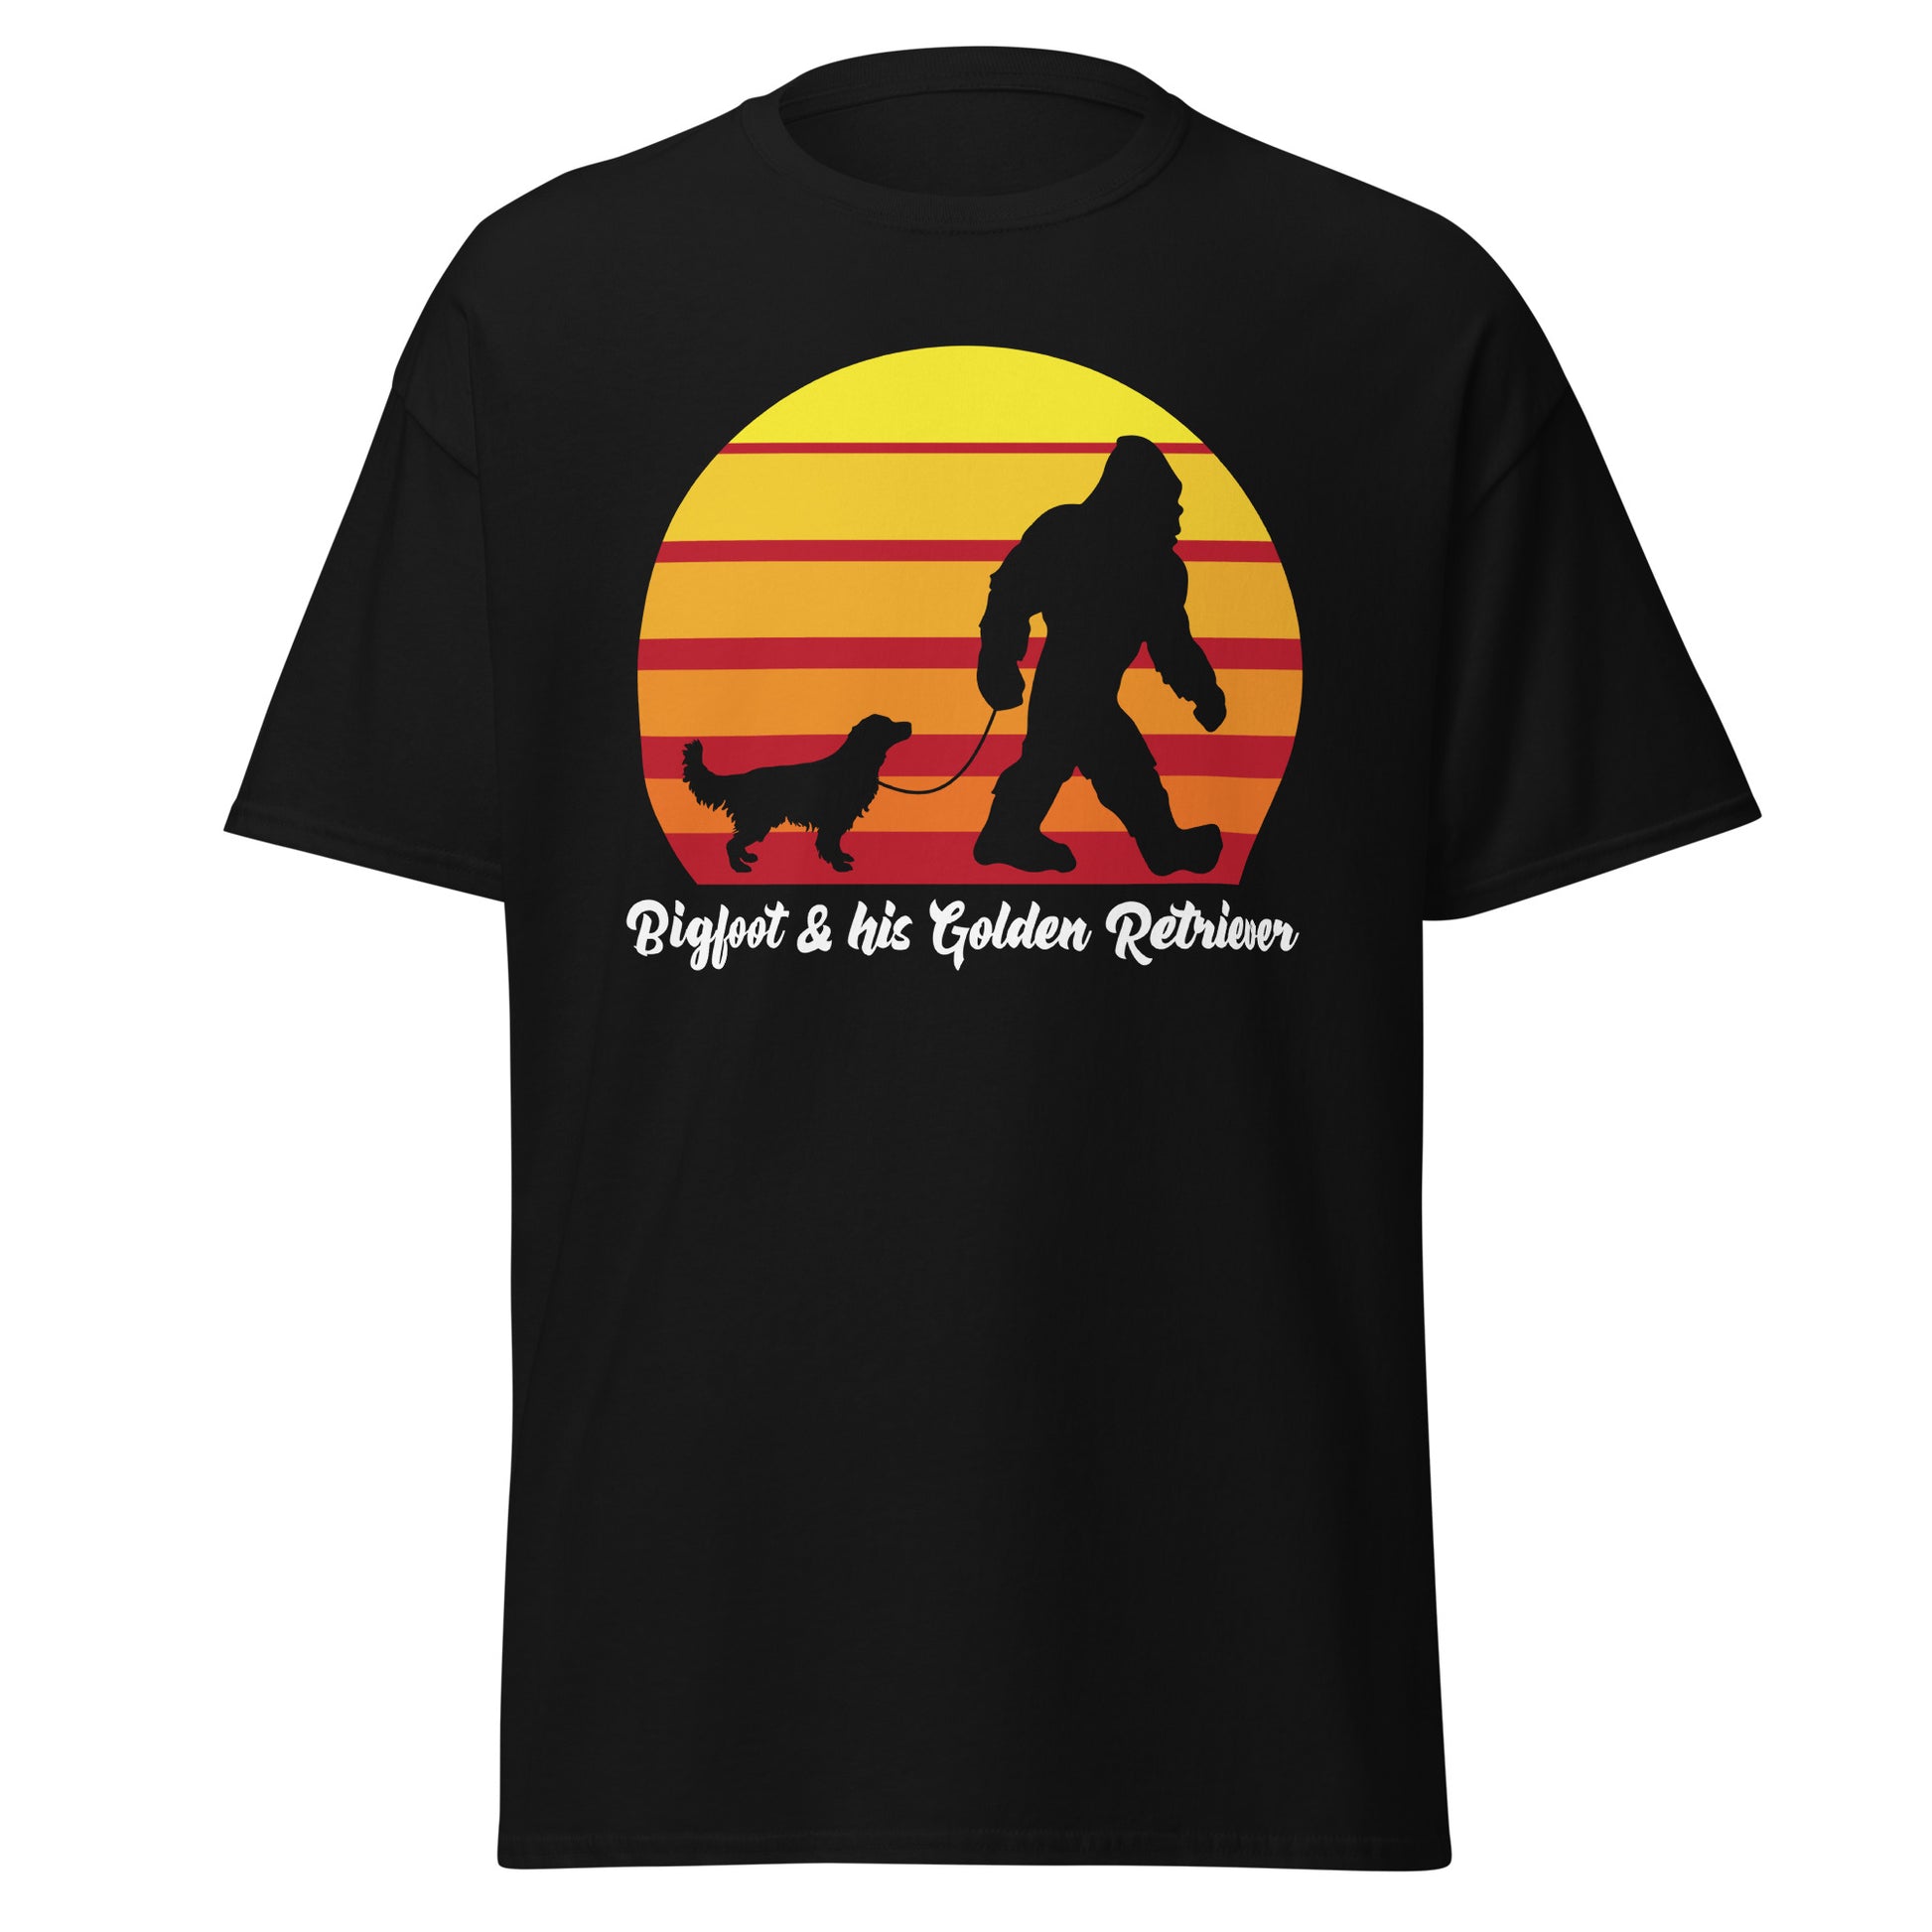 Bigfoot and his Golden Retriever men’s black t-shirt by Dog Artistry.